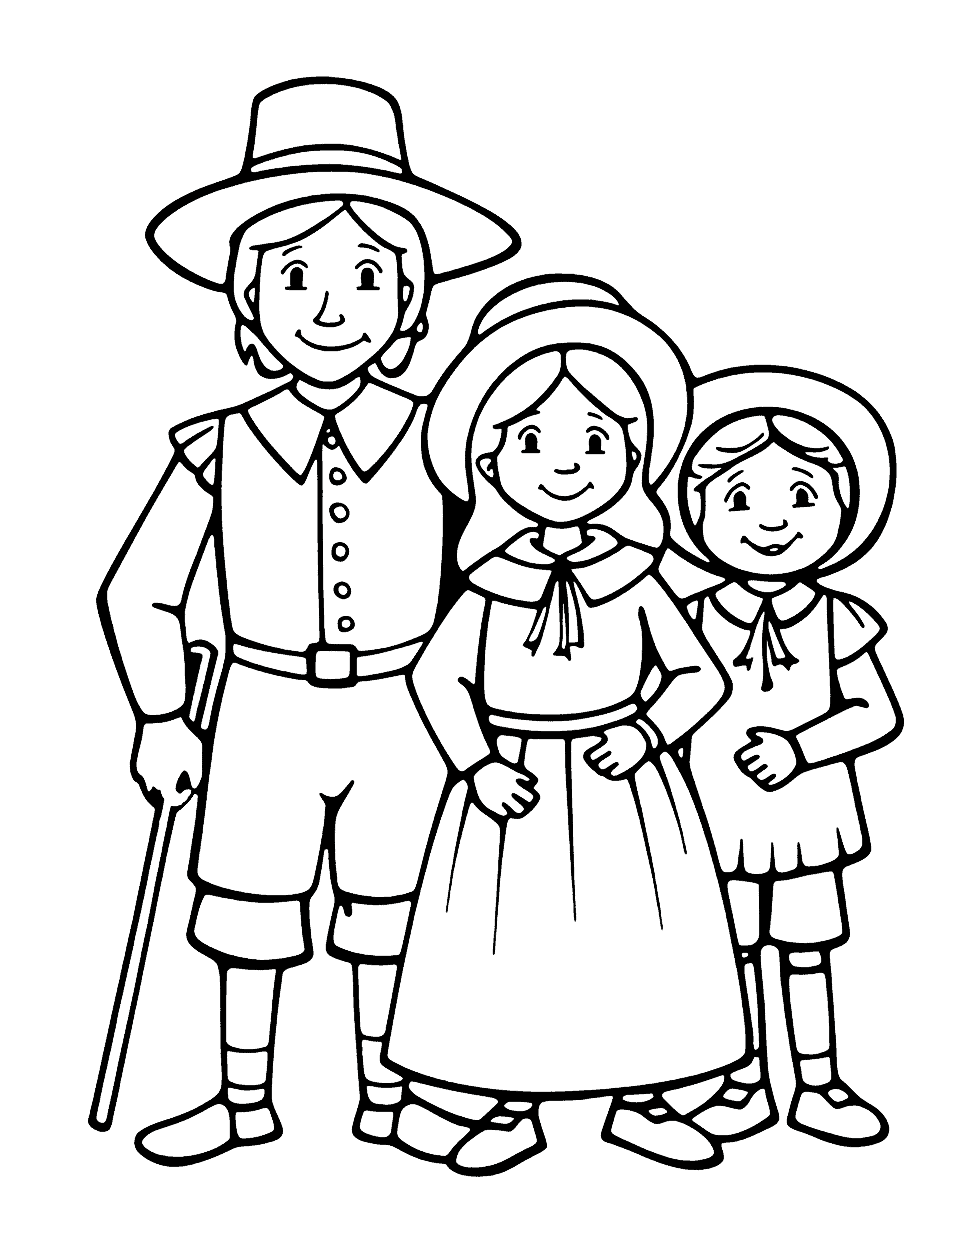 Pilgrim Family Portrait Thanksgiving Coloring Page - A happy pilgrim family posing for a portrait, a good opportunity for color mixing.